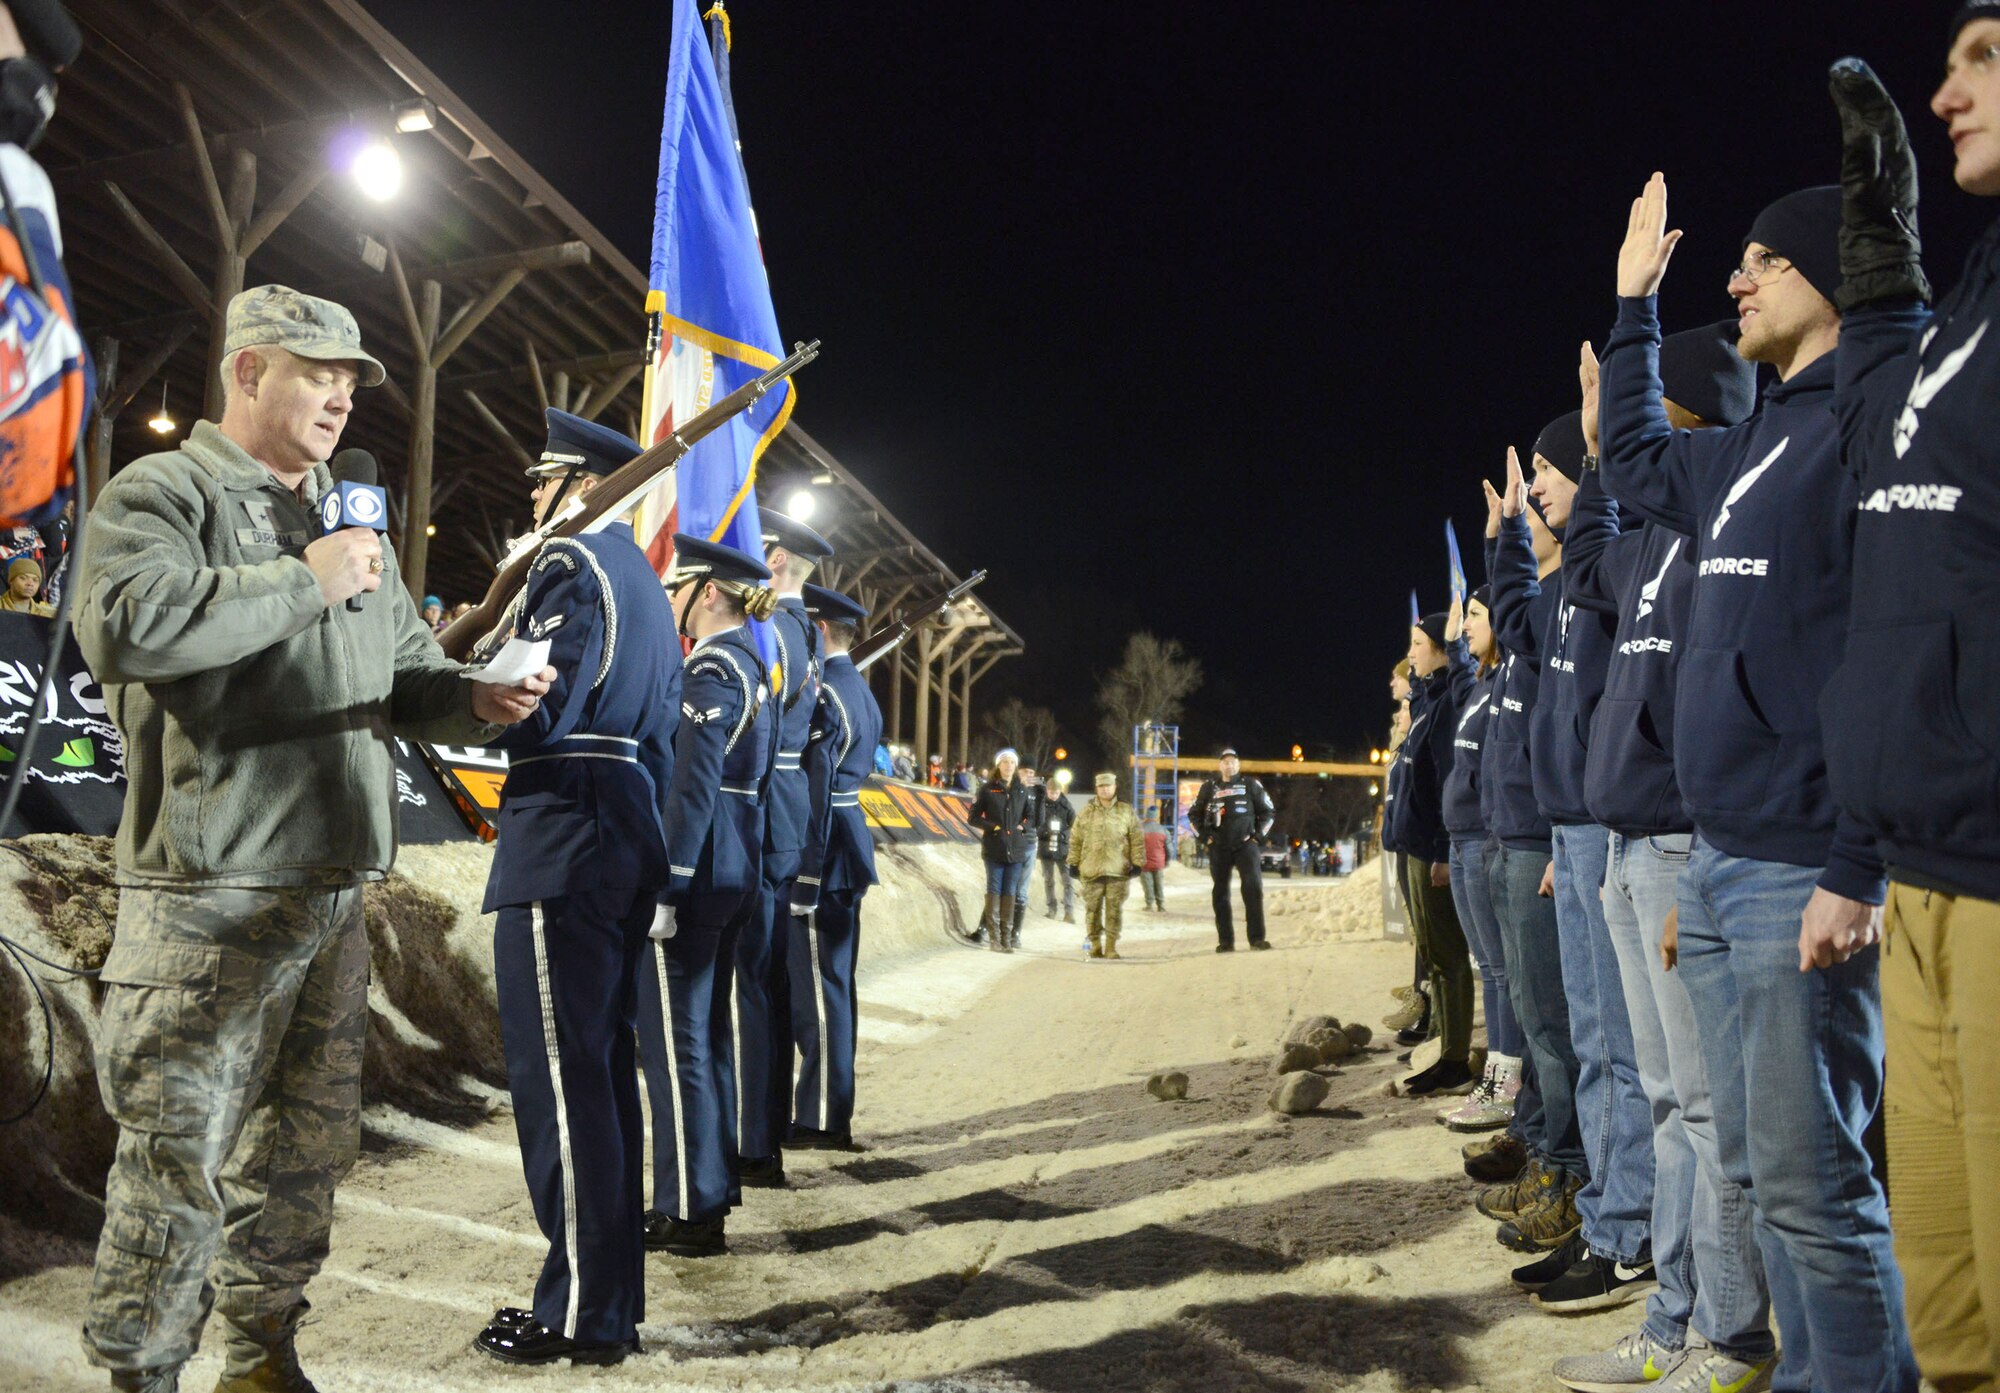 Brig. Gen. Scott Durham, Air Force Recruiting Service, deputy commander, administers the oath of enlistment to 18 new Air Force members during the U.S. Air Force Snocross National in Deadwood, South Dakota.